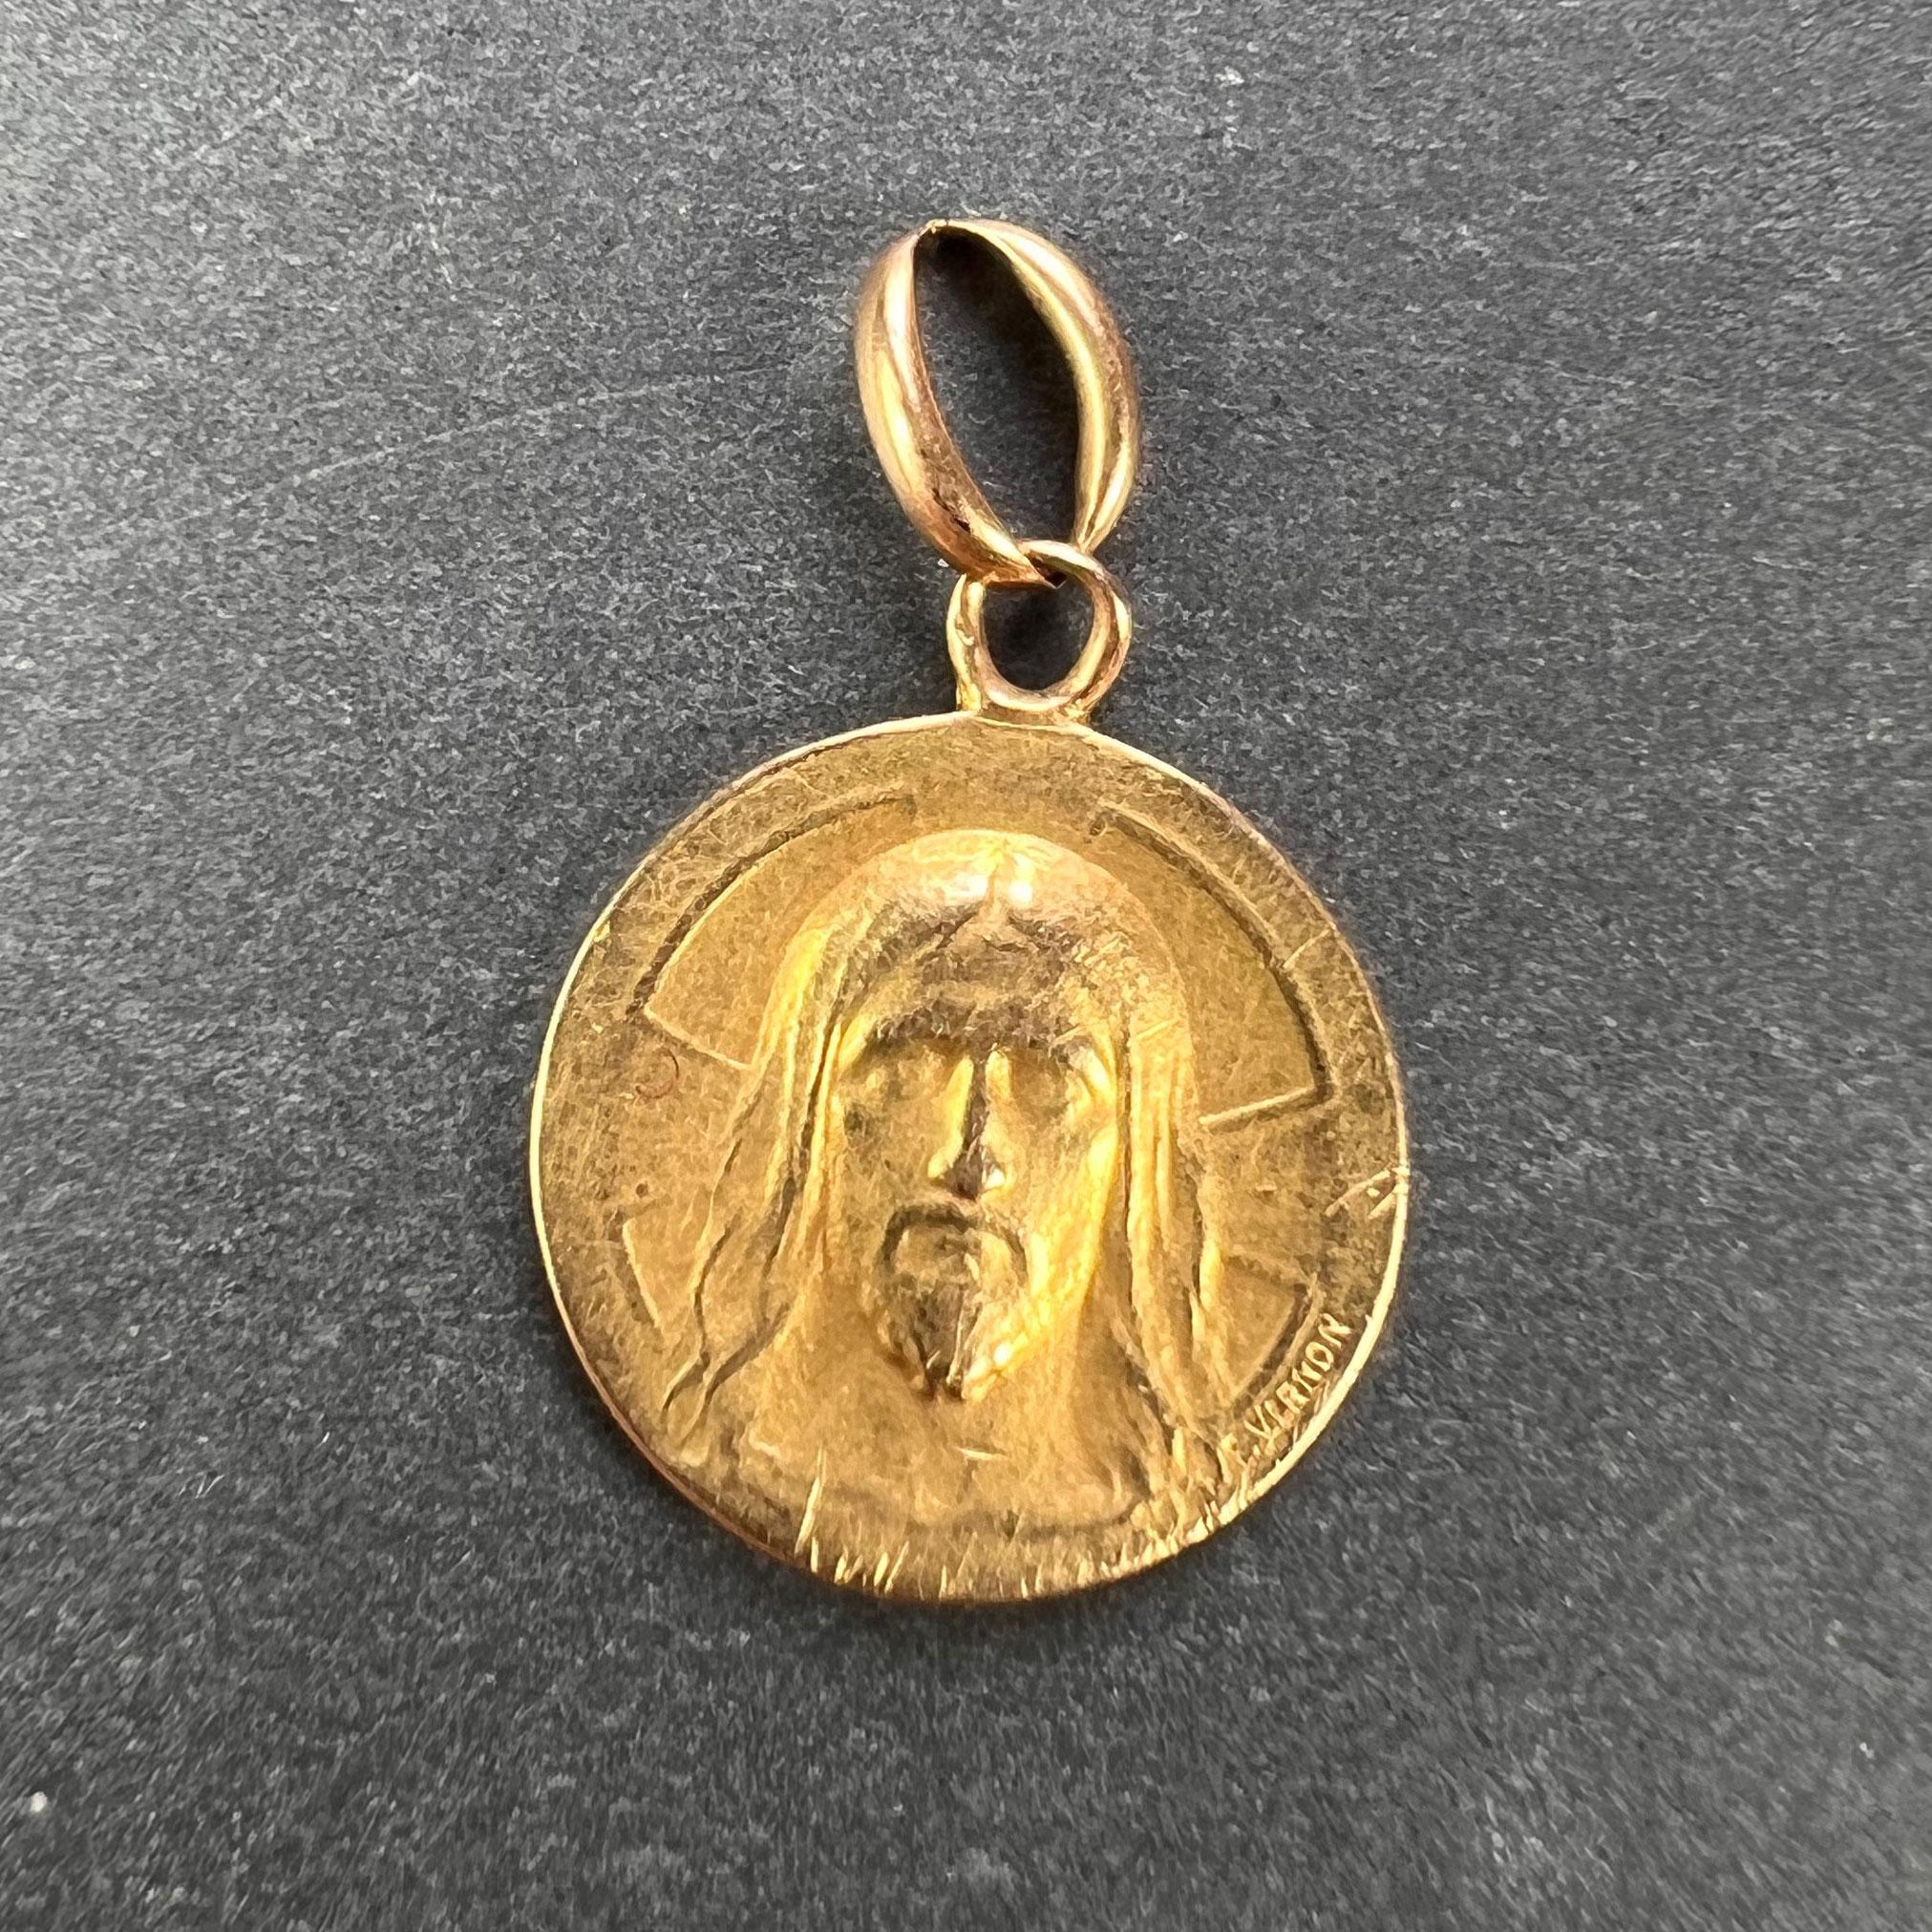 An 18 karat (18K) yellow gold charm pendant depicting the face of Jesus Christ with a cross. Engraved to the reverse with the date 22 Novembre 1937-1952. Signed F. Vernon and stamped with the eagle mark for 18 karat gold and French manufacture.
